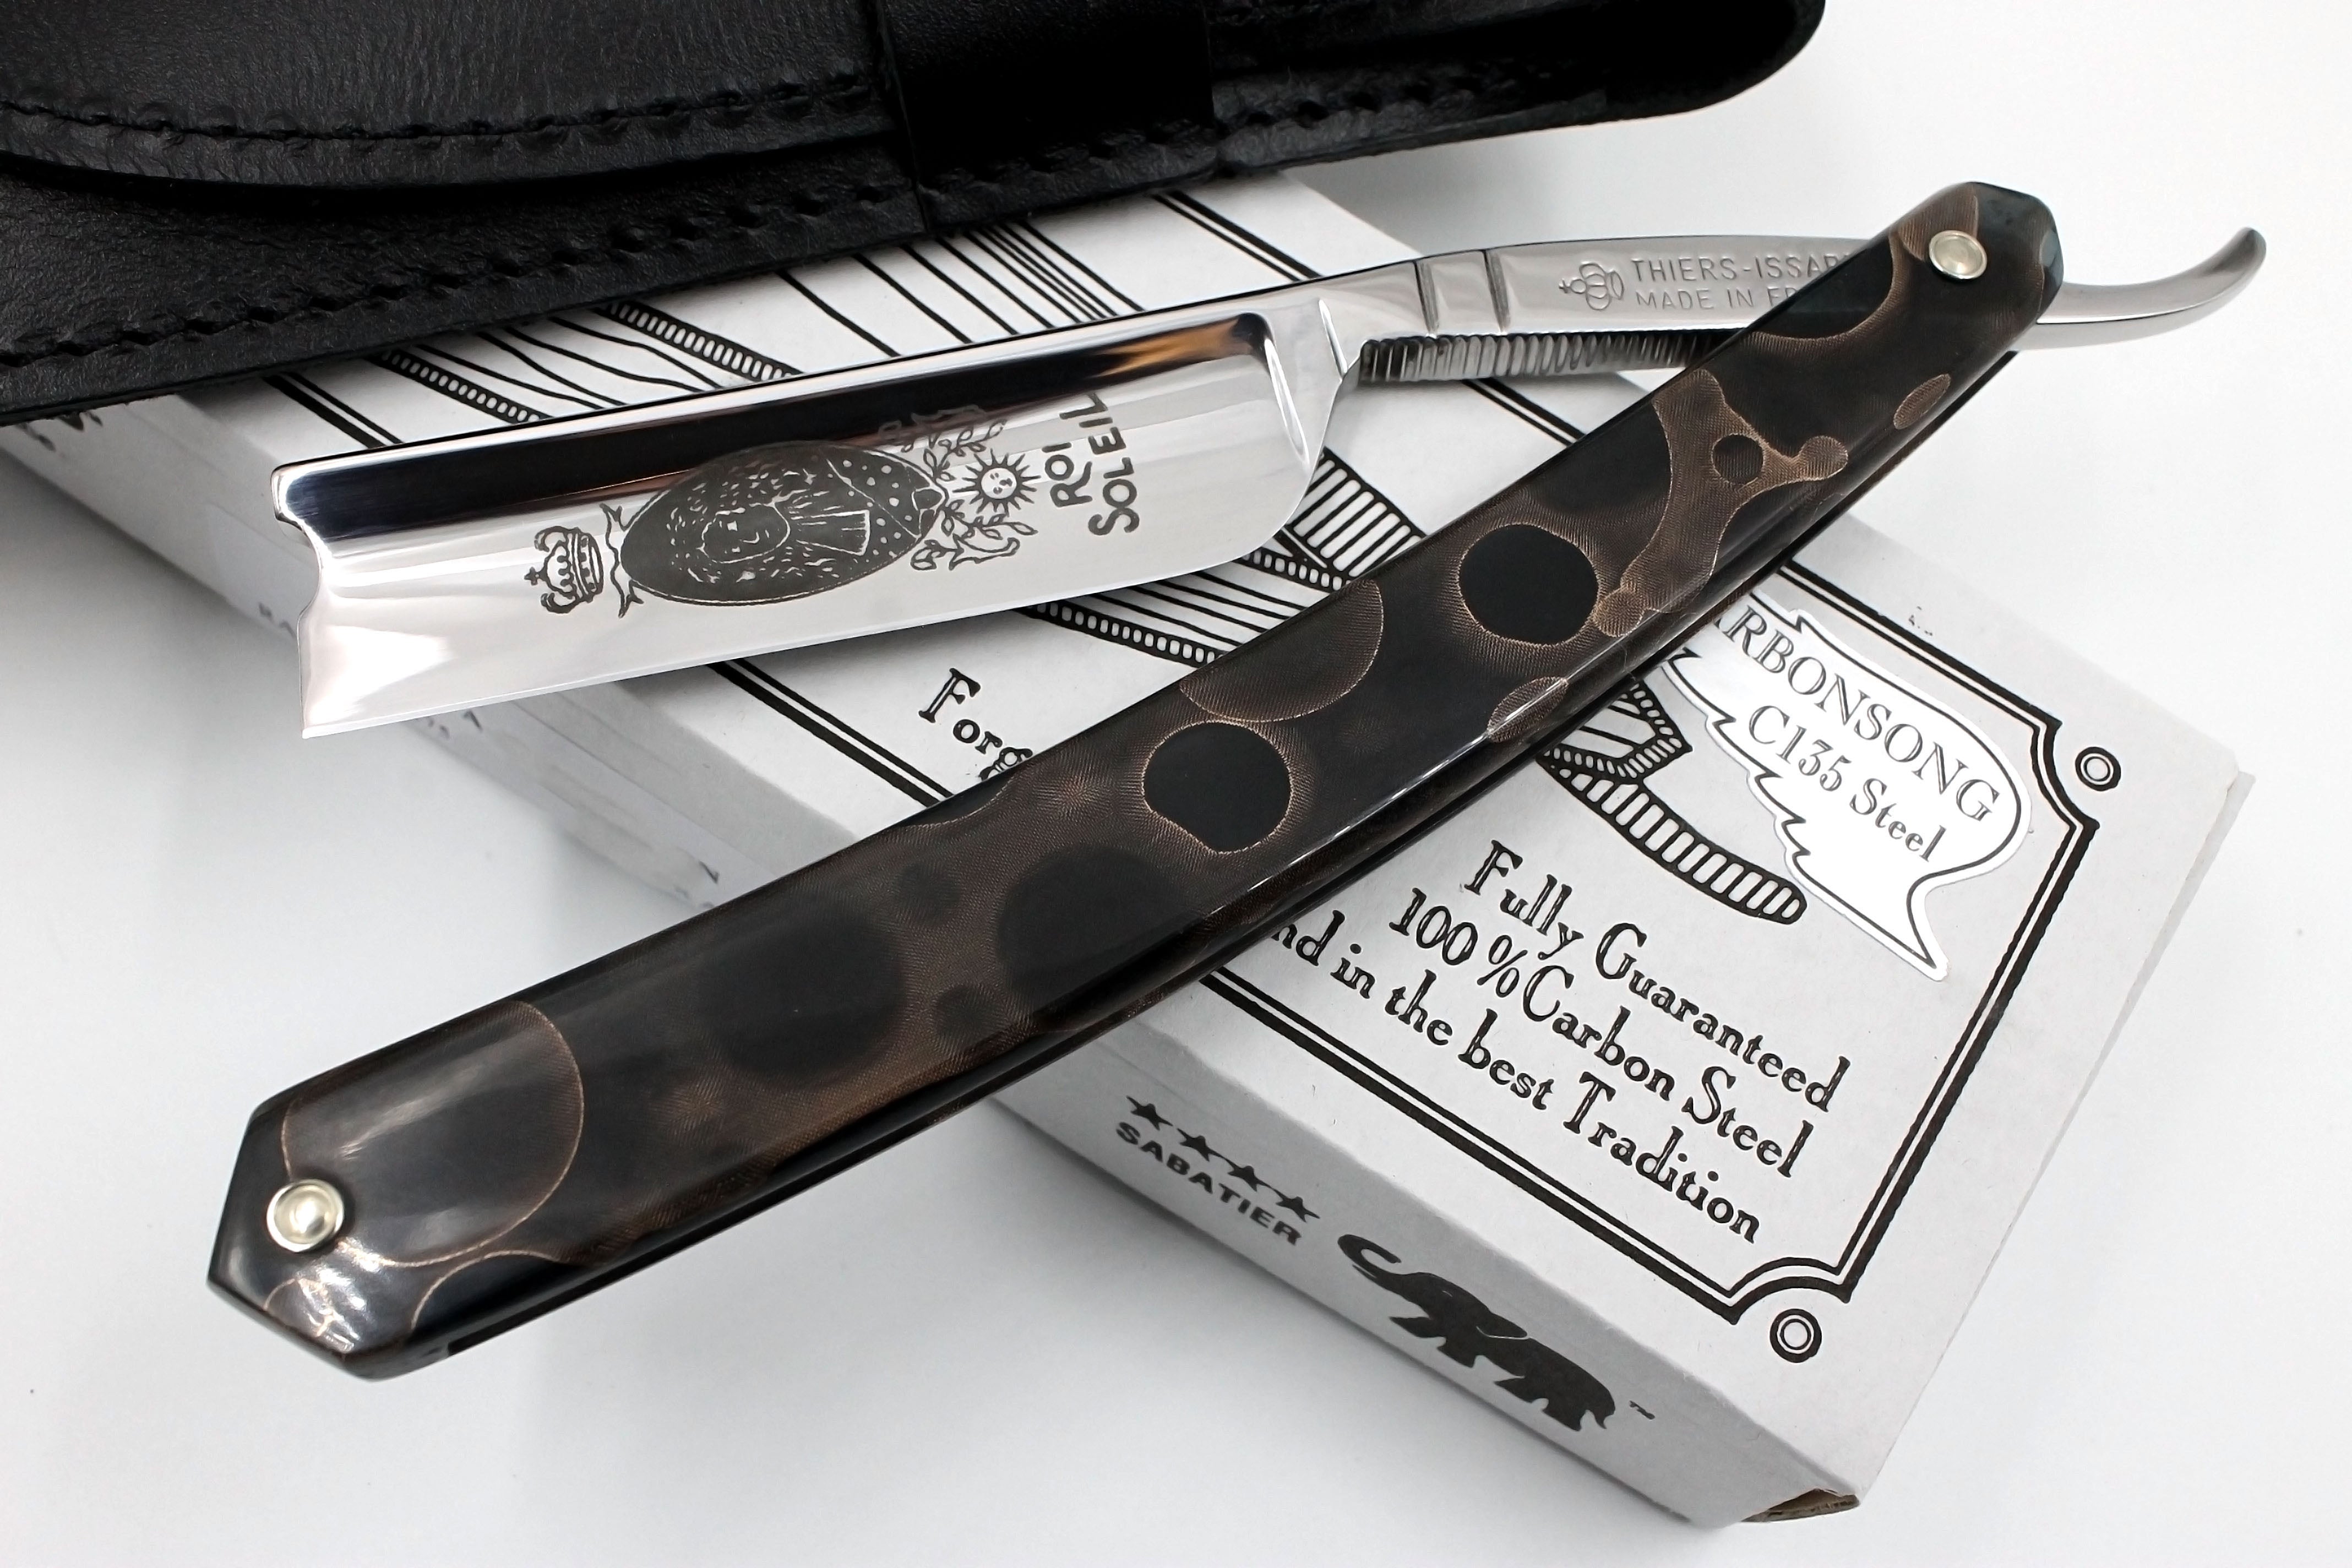 Thiers Issard 6/8 "Roi Soleil" Etch - Composite Moon Scales - Full Hollow Straight Razor